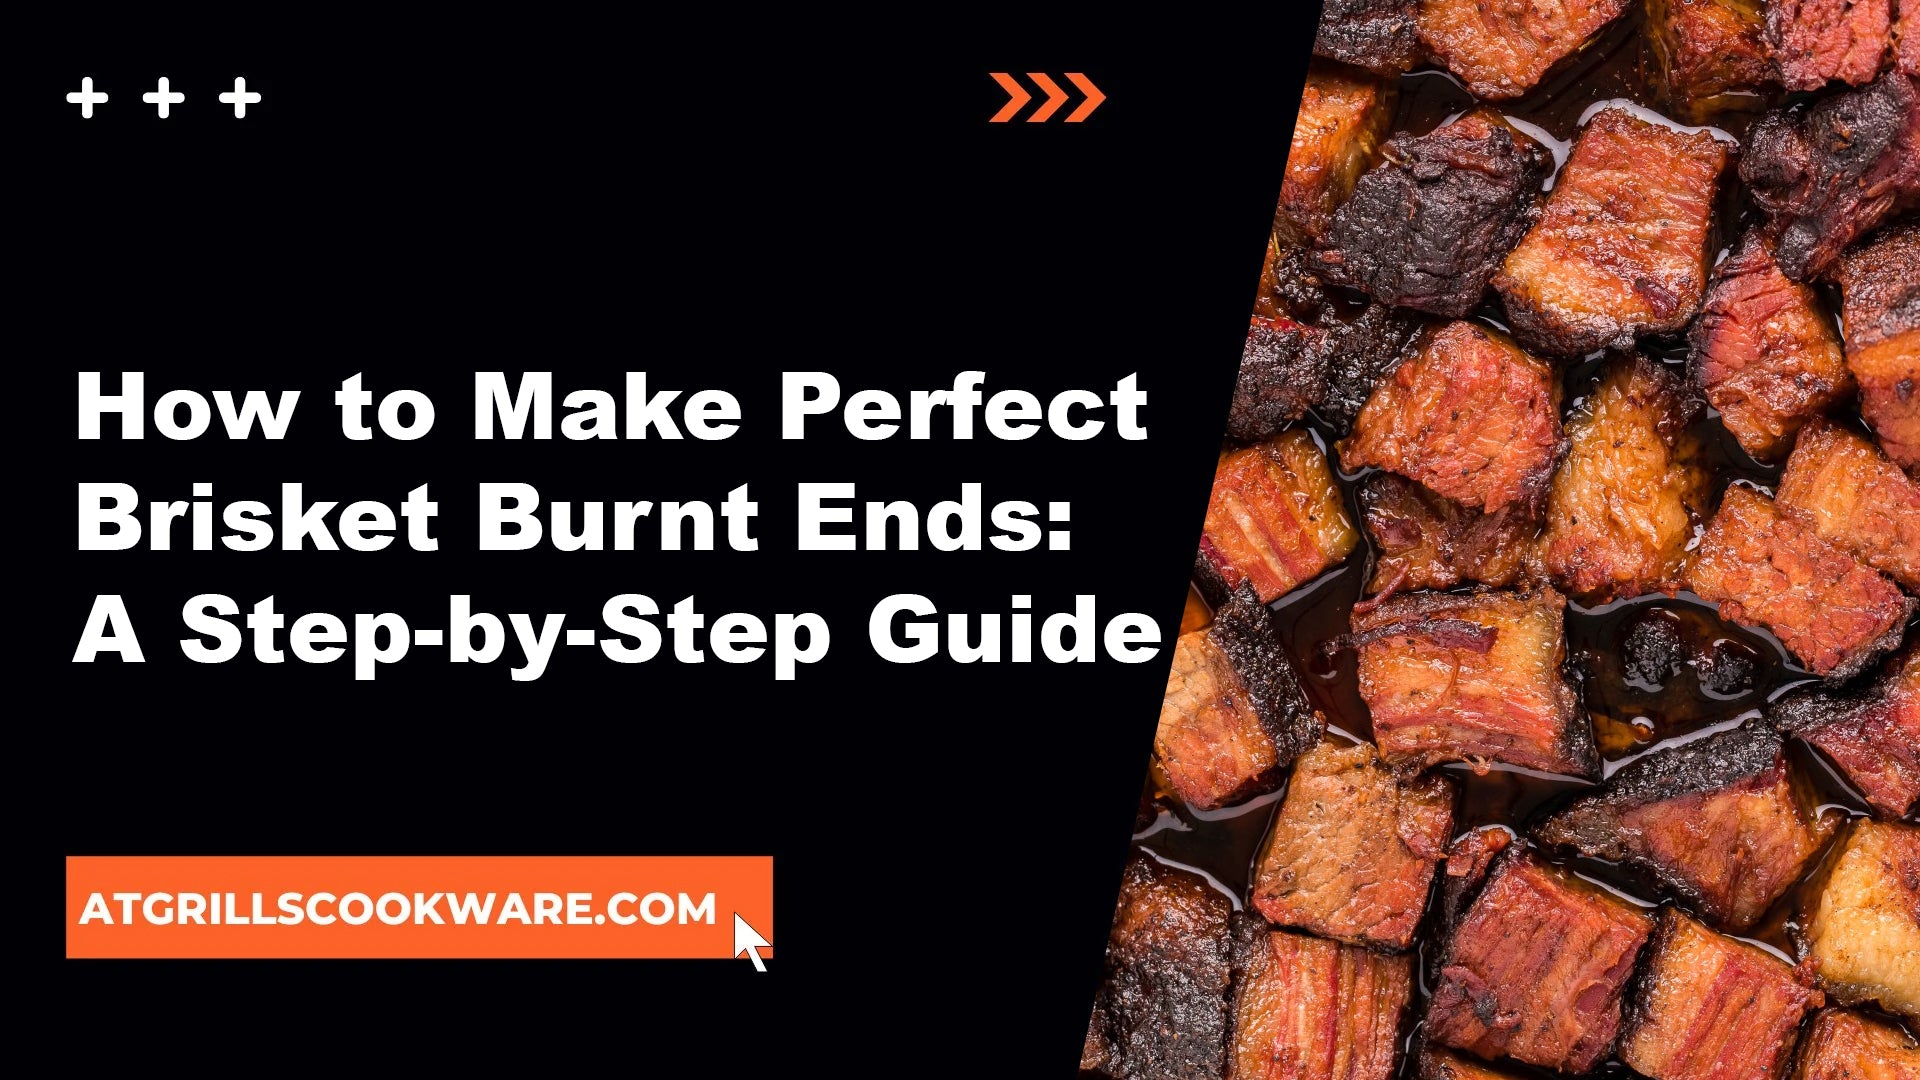 How to Make Perfect Brisket Burnt Ends: A Step-by-Step Guide